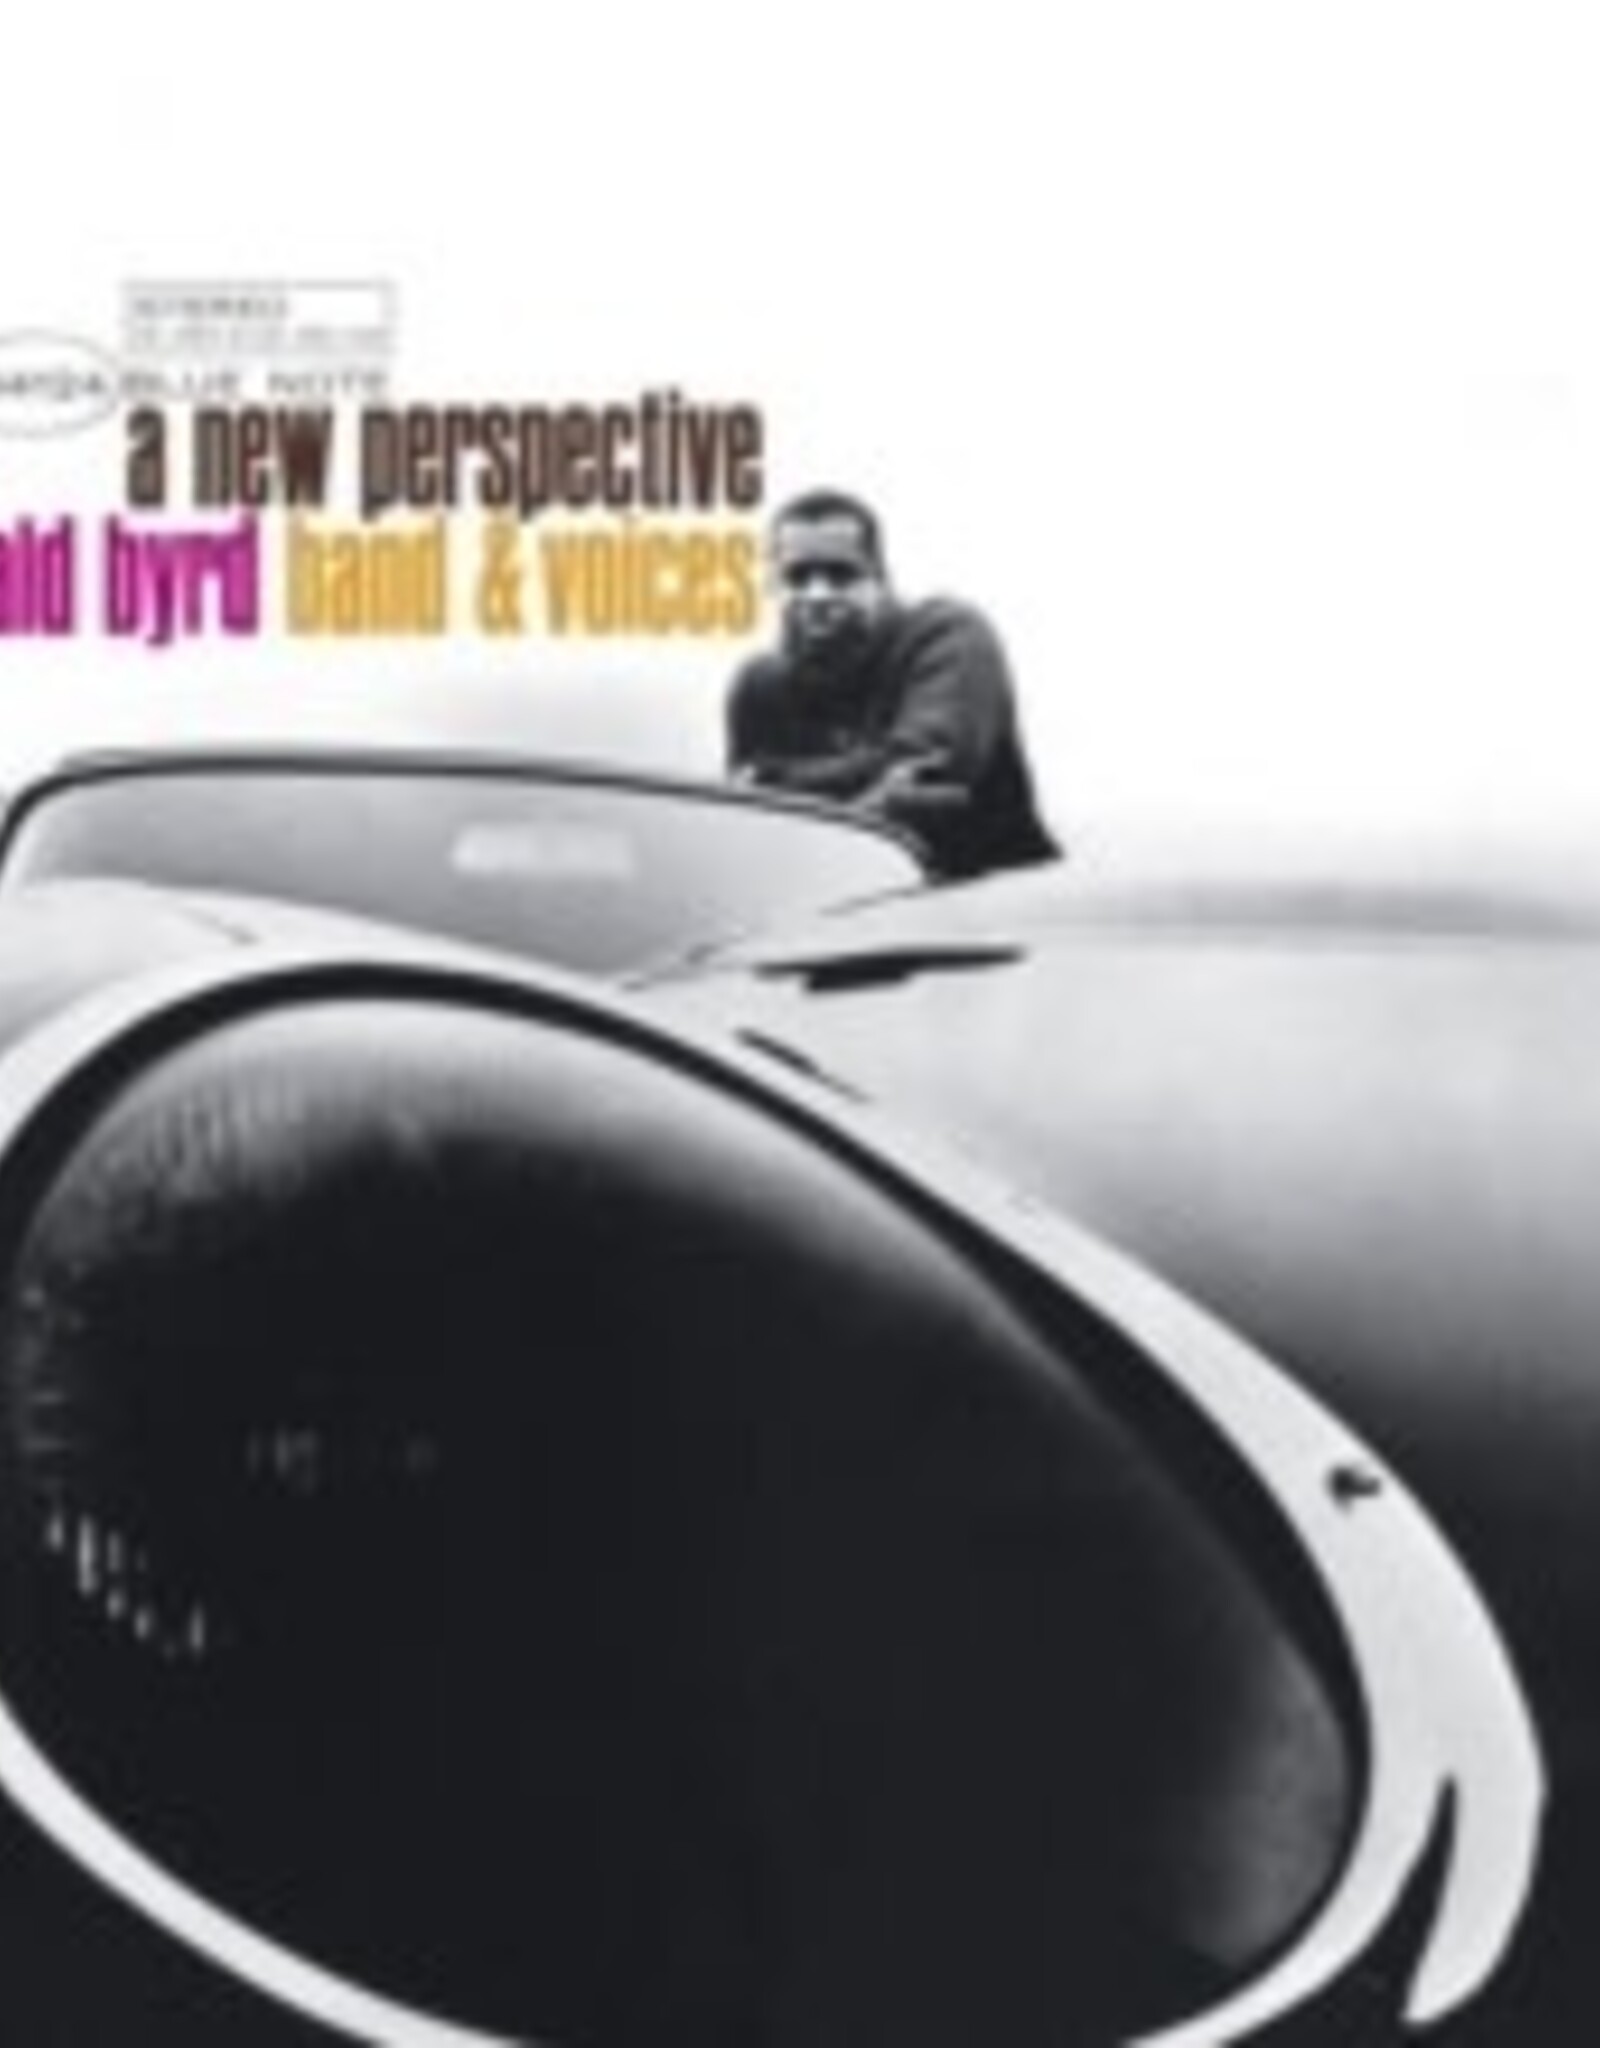 Donald Byrd  - New Perspective (Blue Note Classic Vinyl Series)